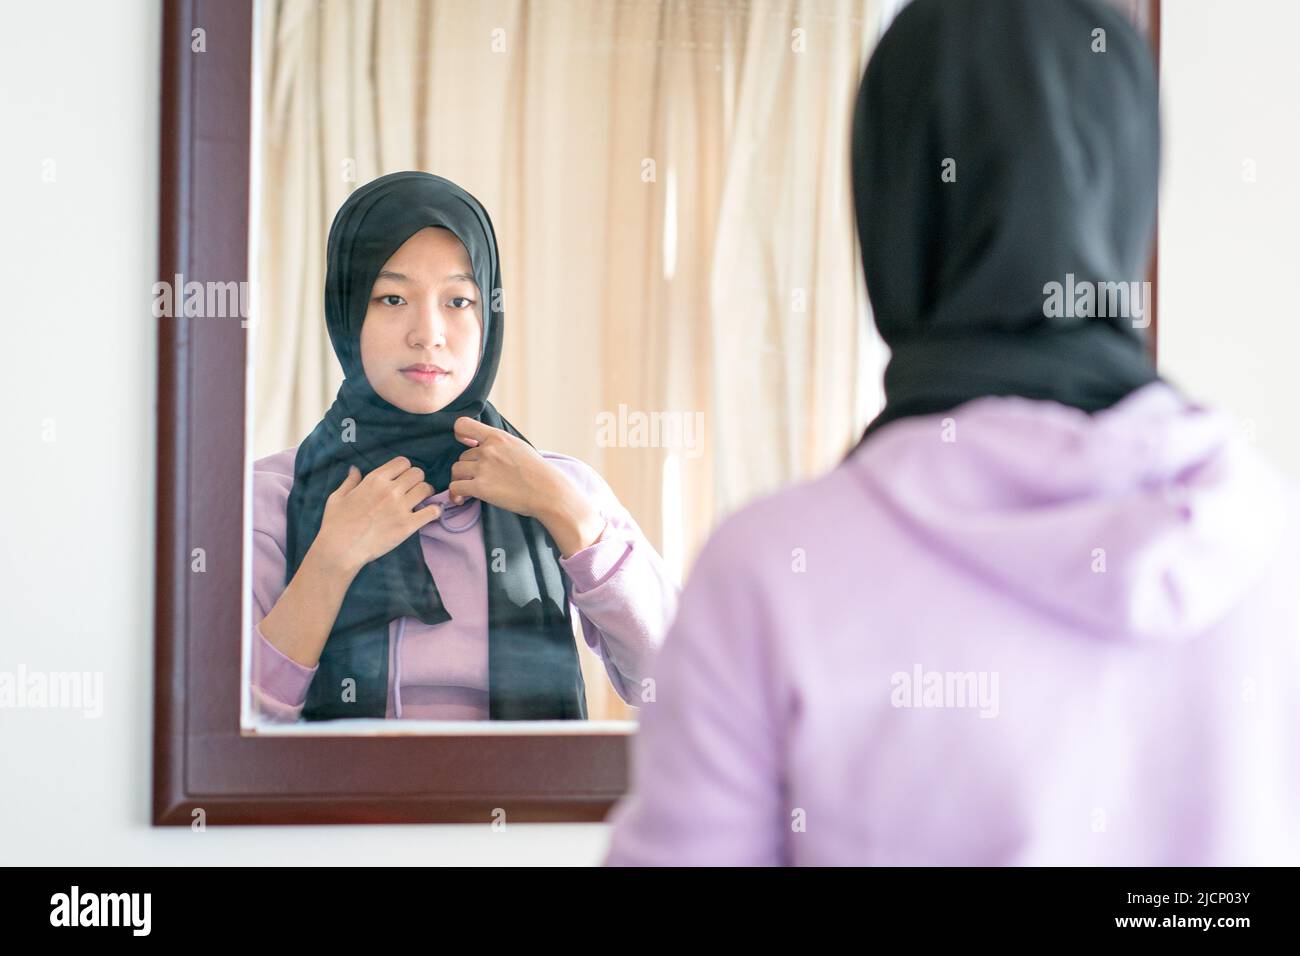 Reflection on a wall mirror of a muslim woman wearing and adjusting her head scarf. Stock Photo